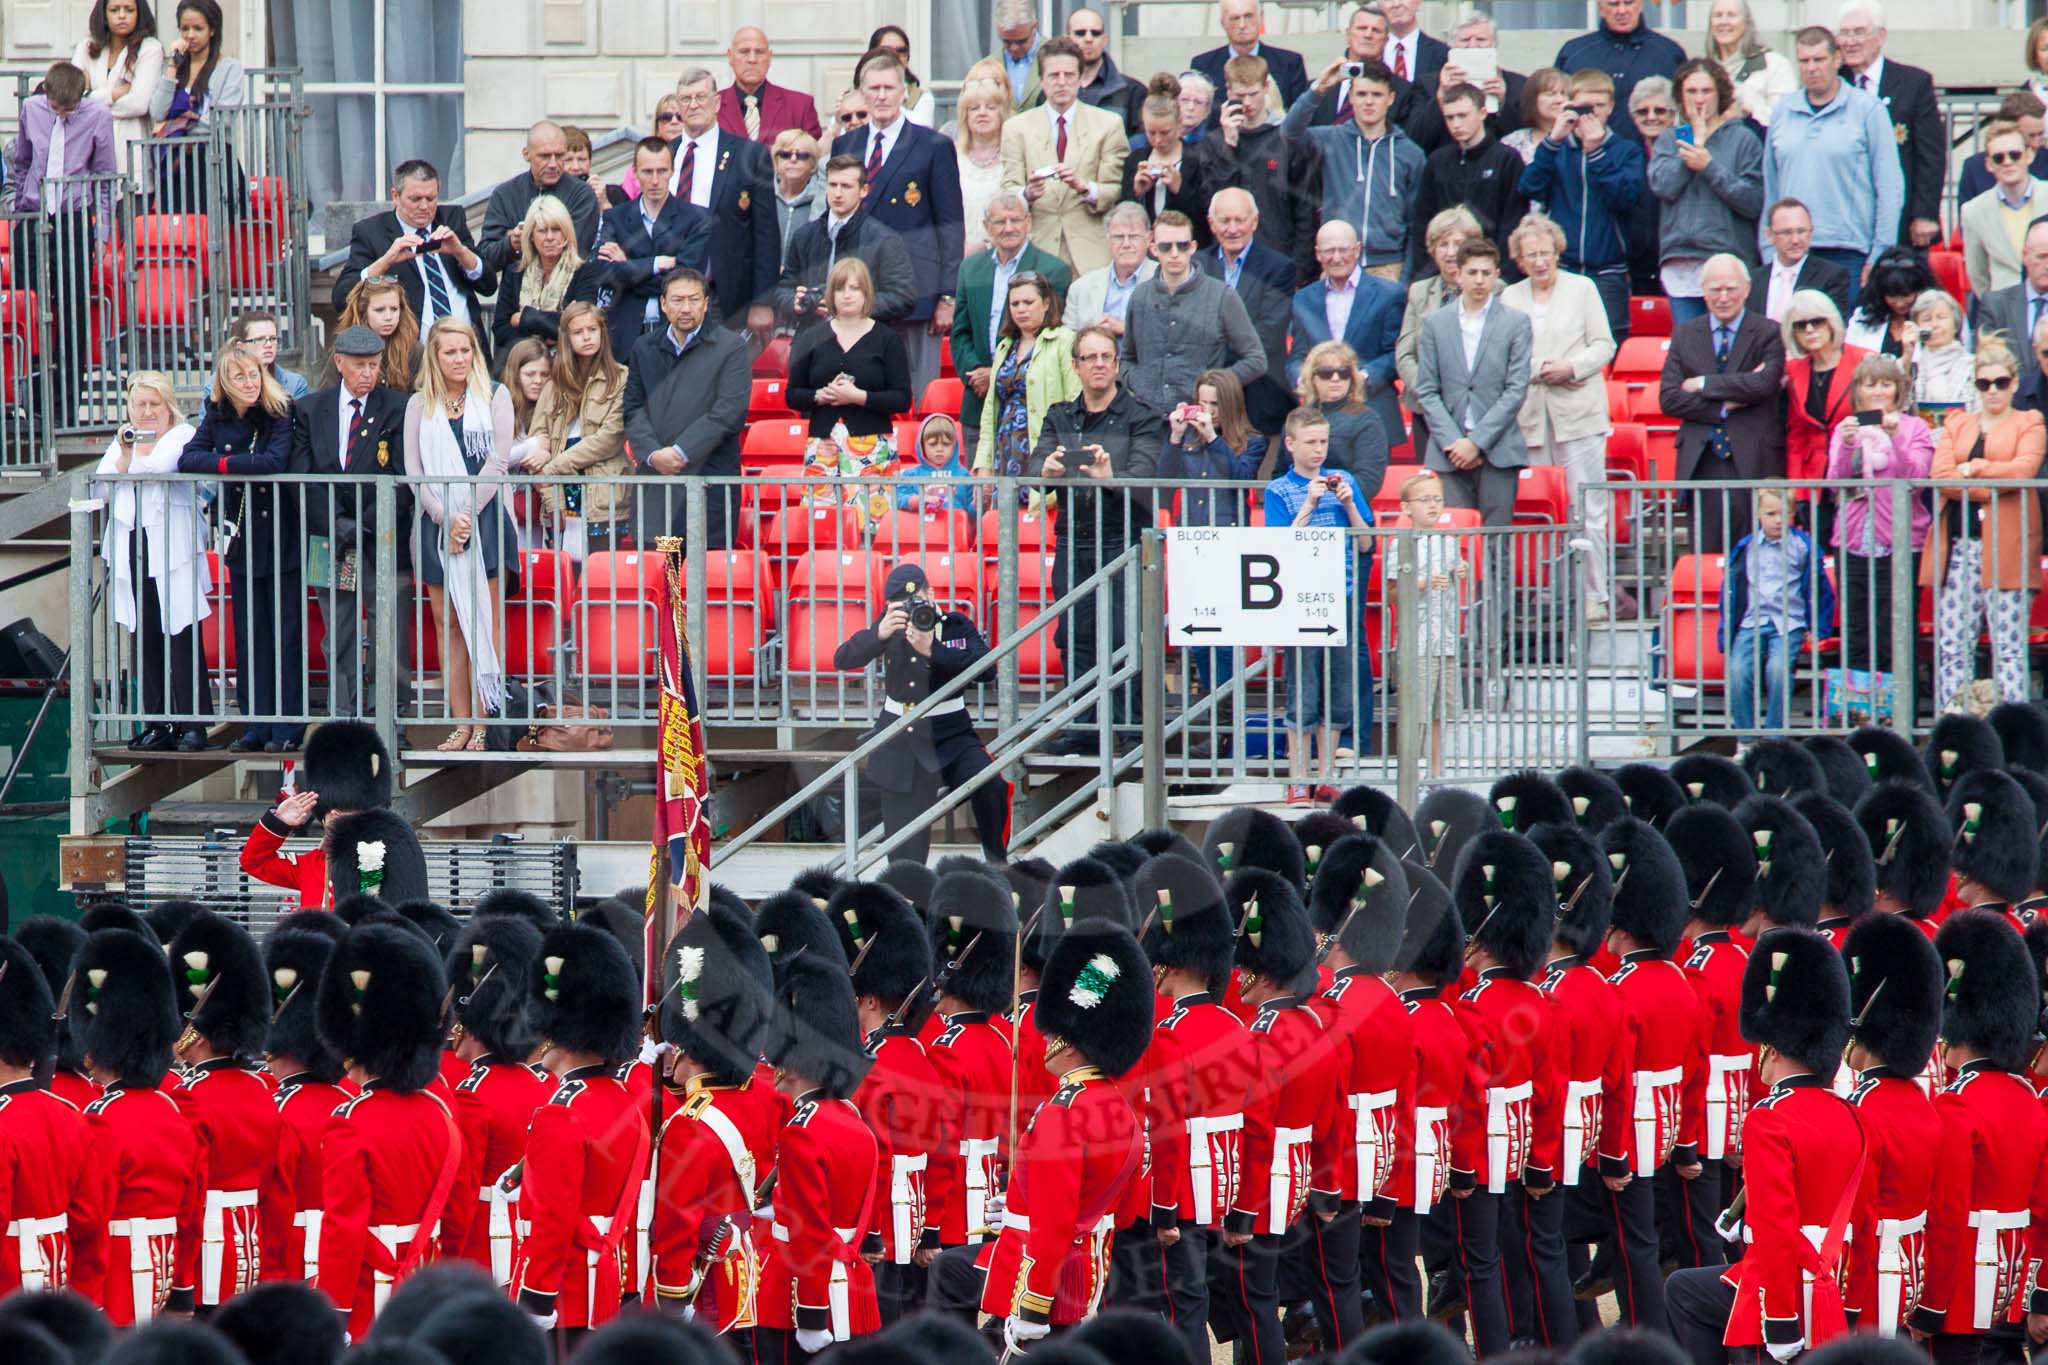 Major General's Review 2013: No. 1 Guard, the Escort to the Colour),1st Battalion Welsh Guards, with the Ensign carrting the Colour behind the lines of guardsmen, during the March Past..
Horse Guards Parade, Westminster,
London SW1,

United Kingdom,
on 01 June 2013 at 11:37, image #517